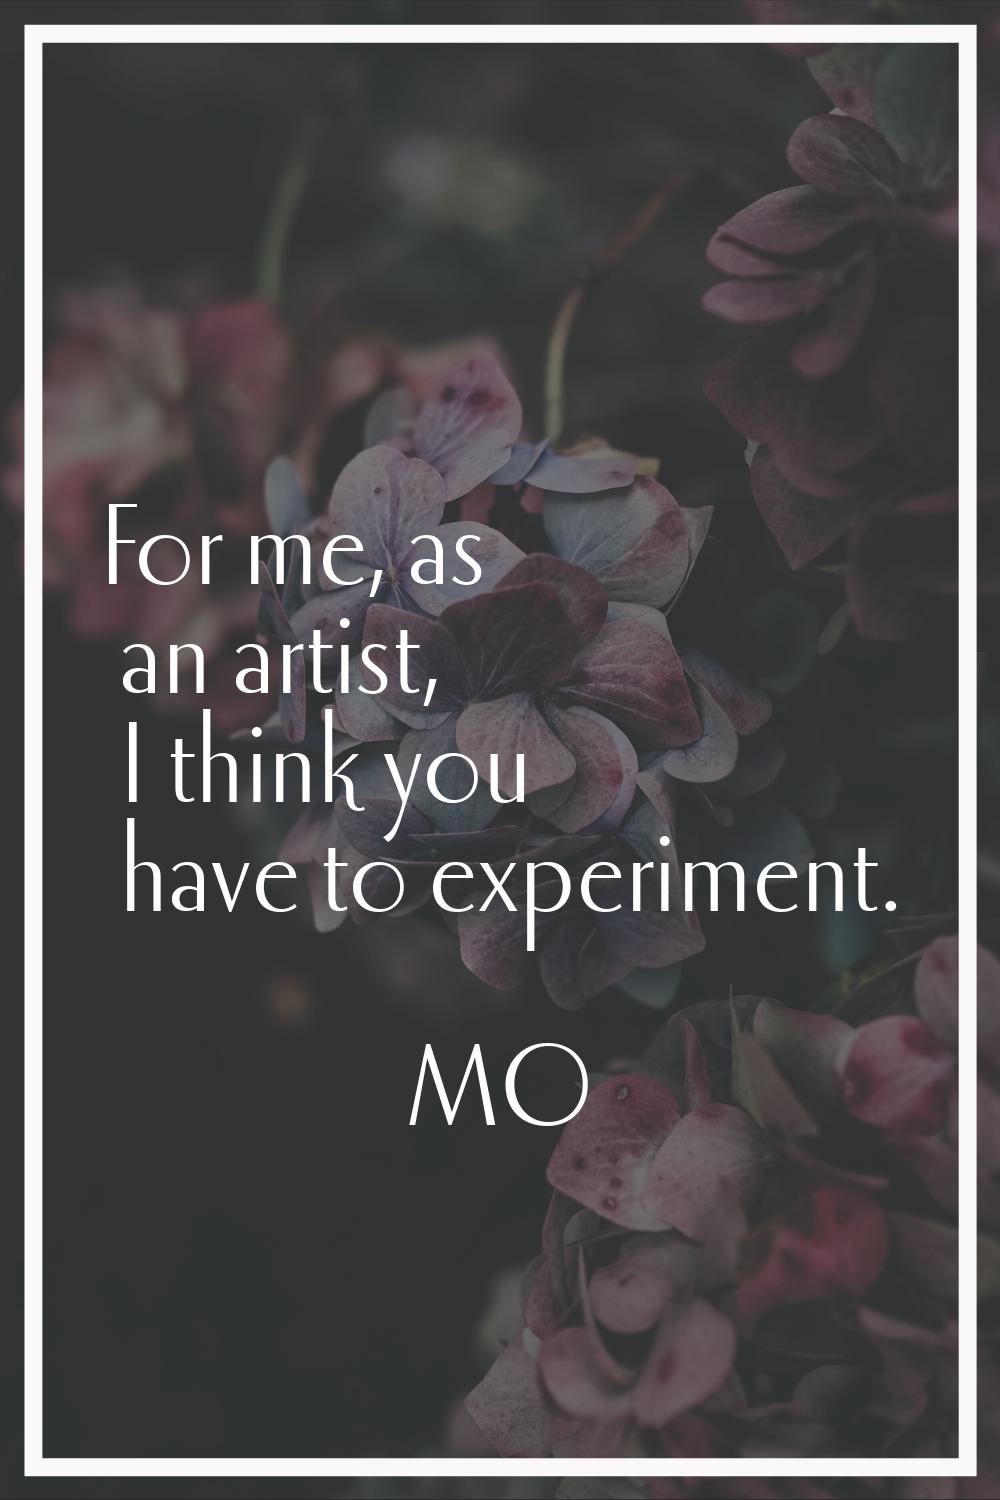 For me, as an artist, I think you have to experiment.